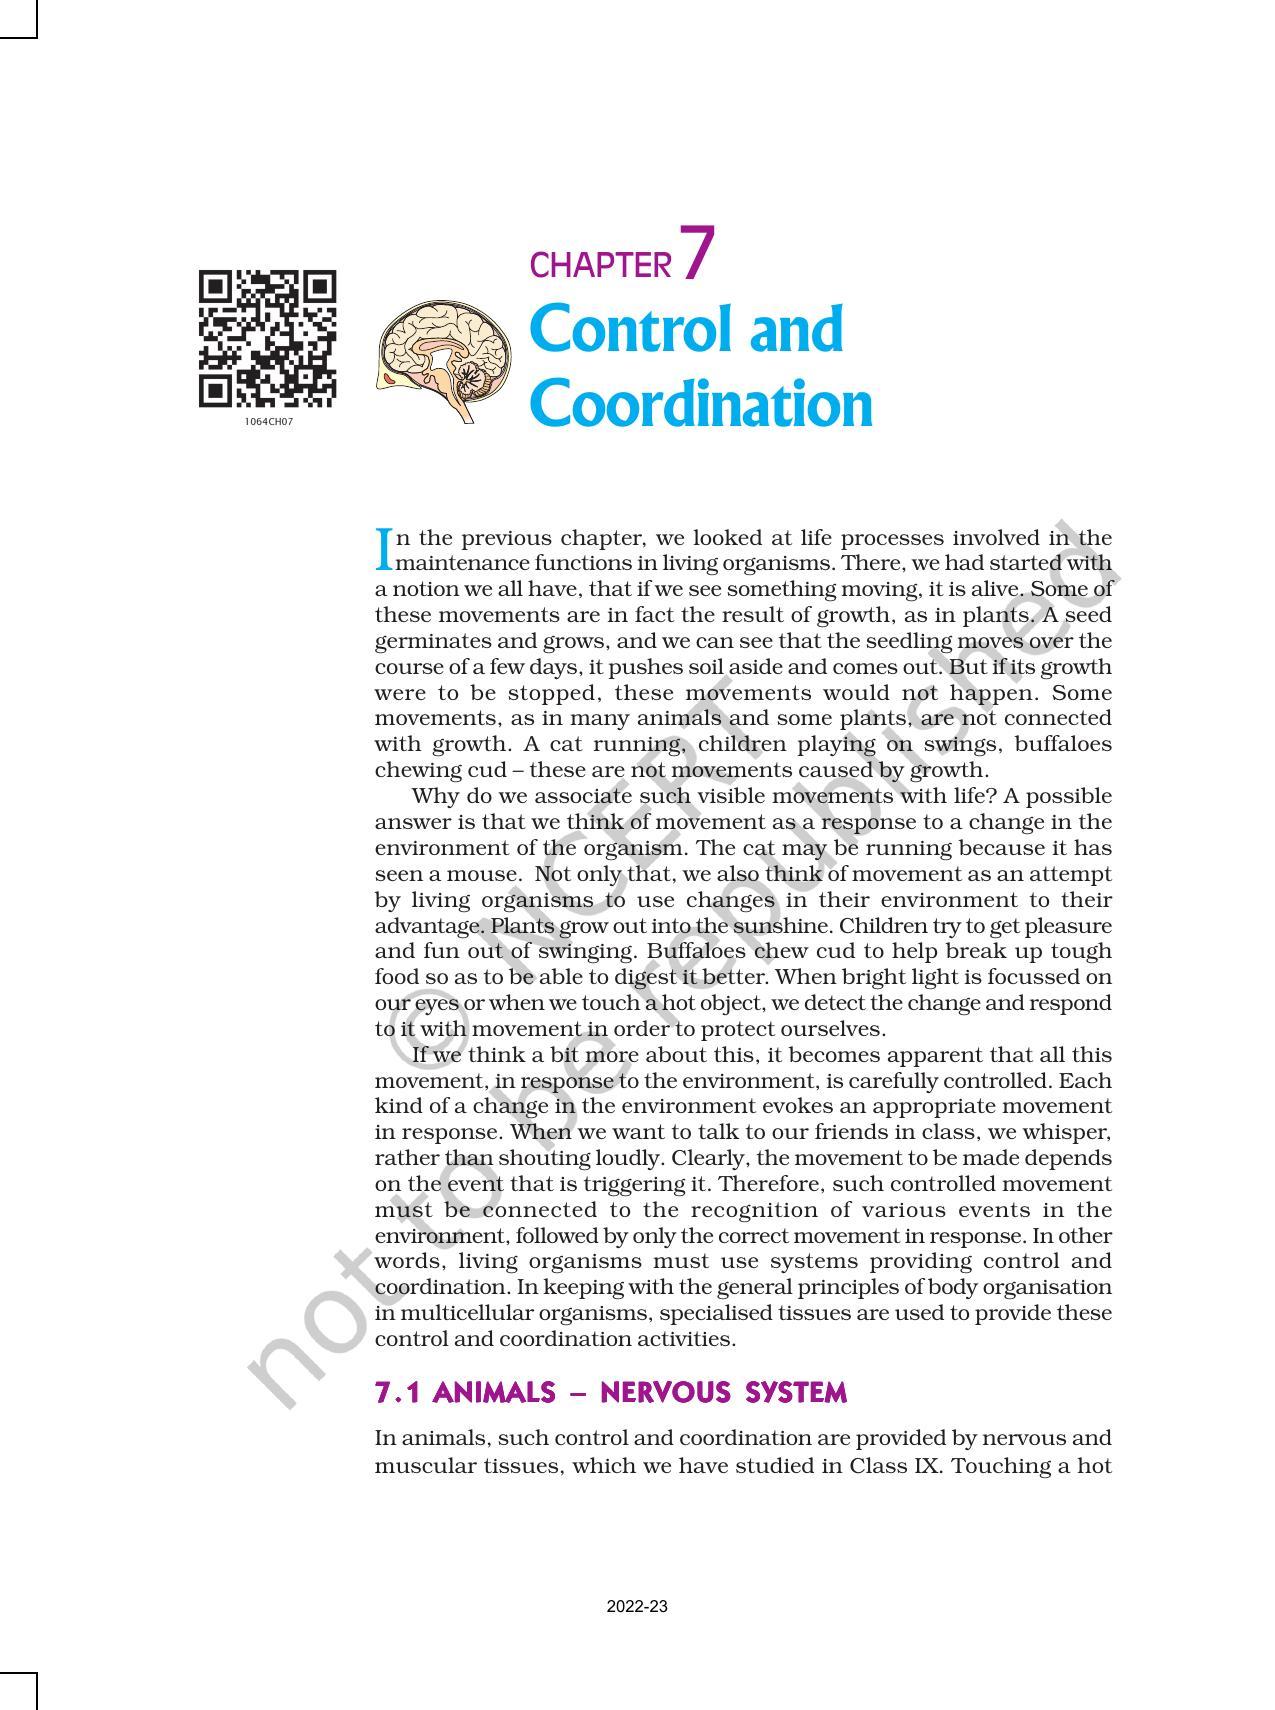 NCERT Book for Class 10 Science Chapter 7 Control and Coordination - Page 1